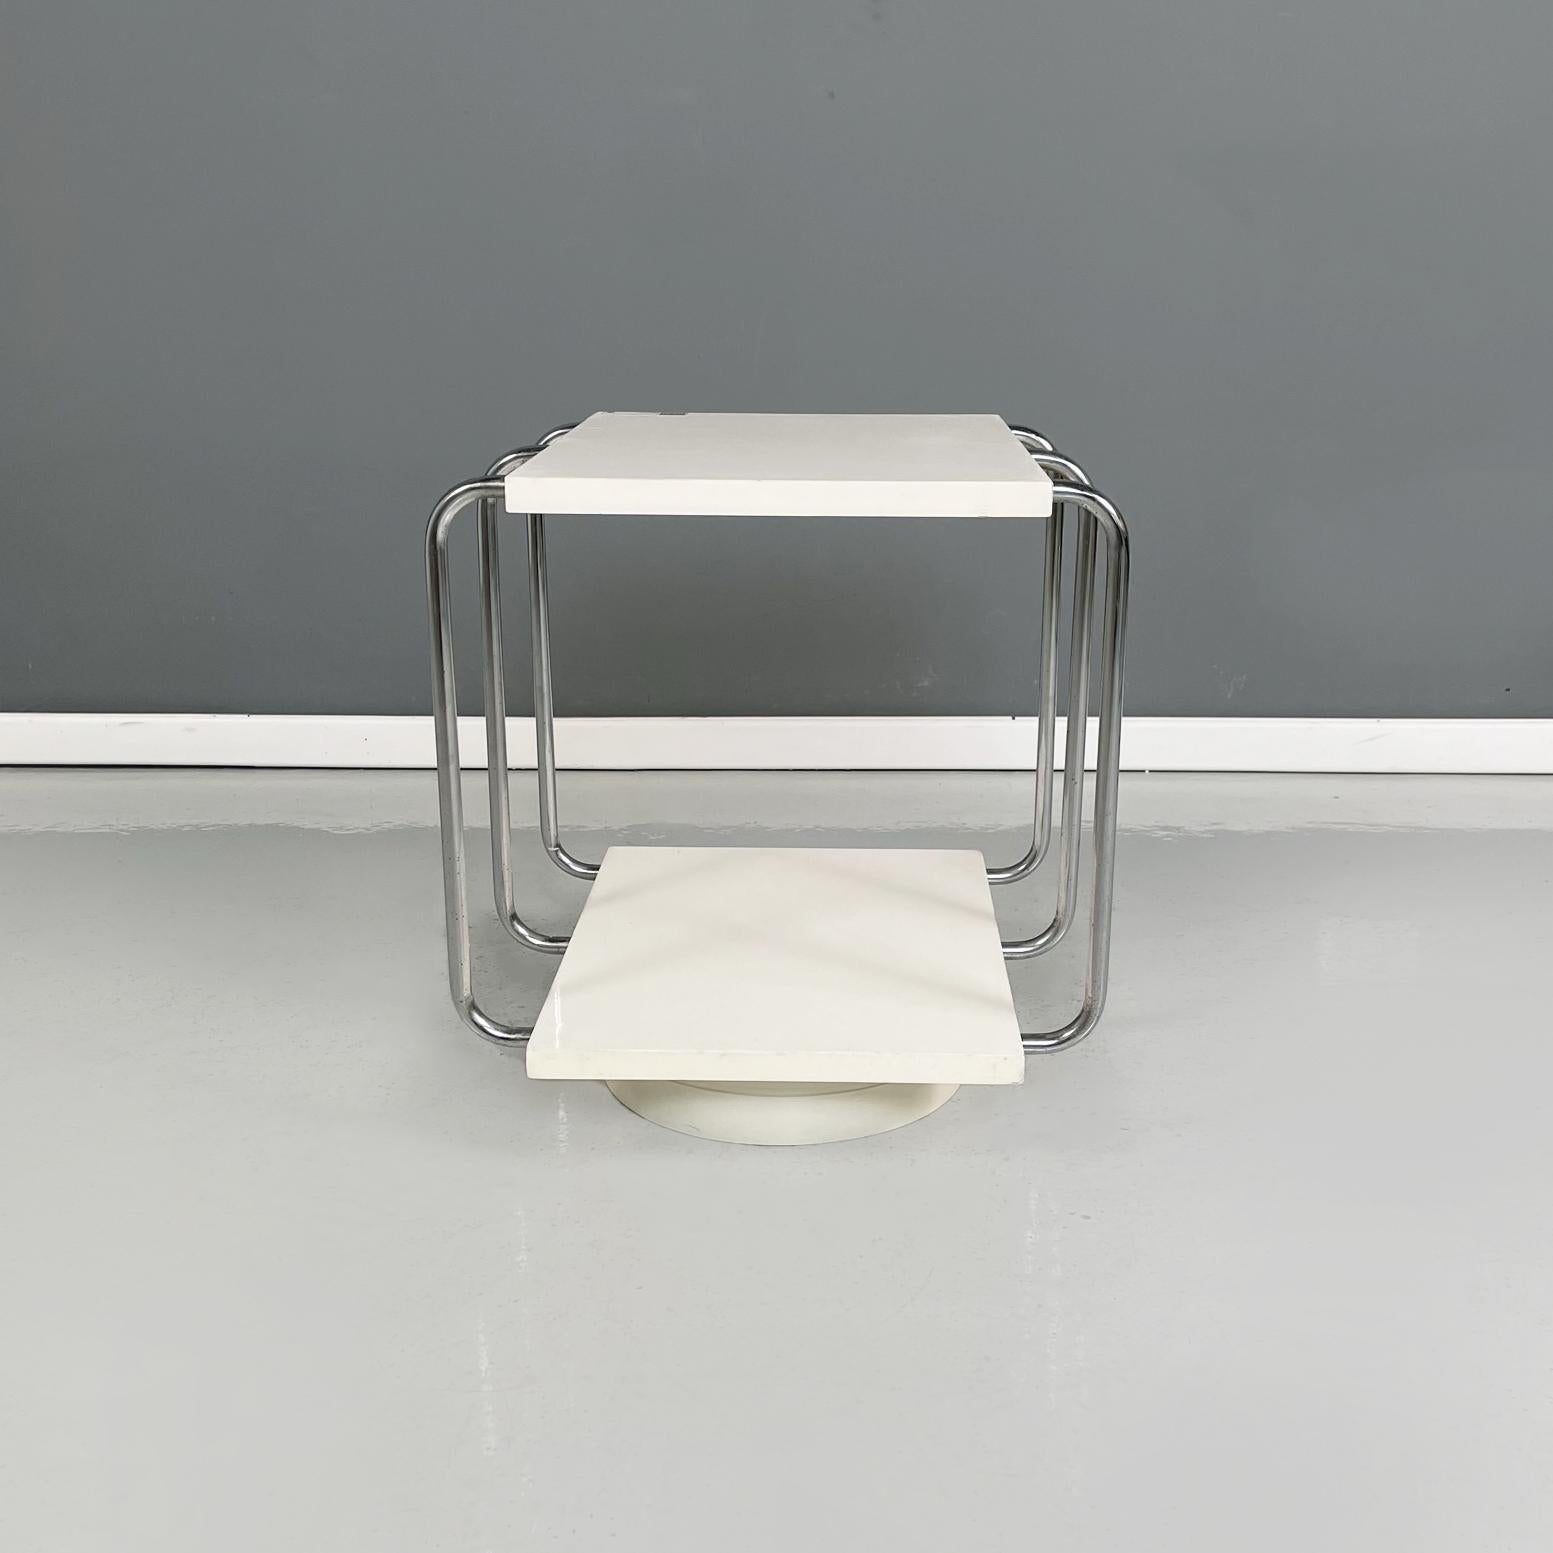 Italian modern Double-shelf coffee table in white painted wood and metal, 1980s
Rectangular double-shelf coffee table in white painted wood. The structure is in tubular metal. Round base in white painted wood.
1980s
Vintage condition, it show